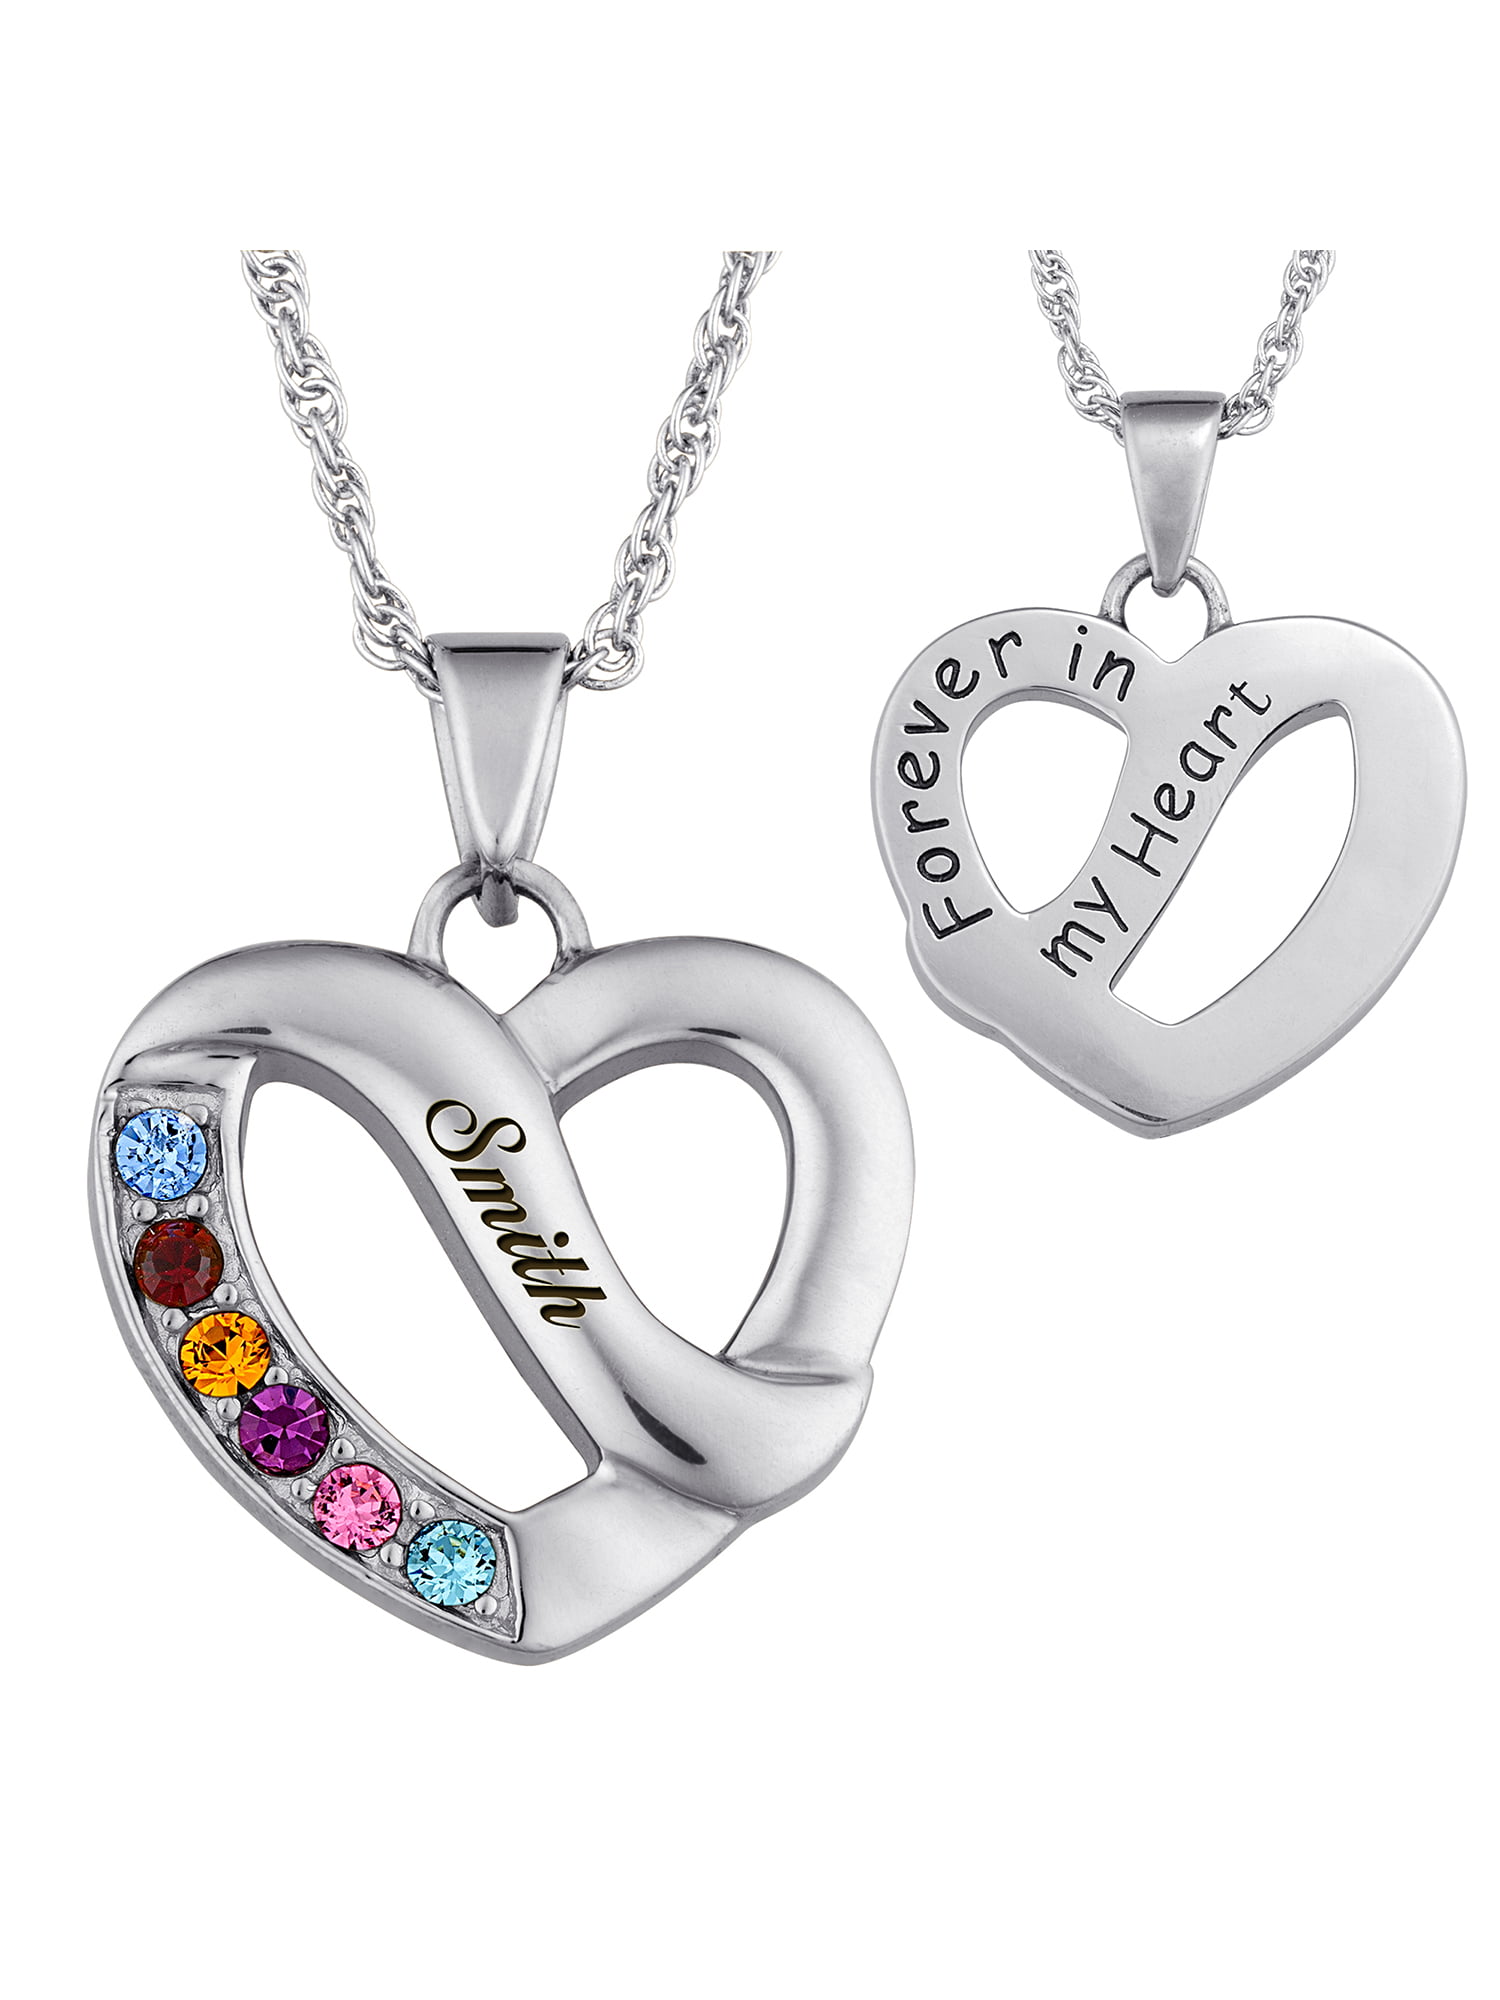 Family Jewelry Personalized Mother's Family Name & Birthstone Heart ...